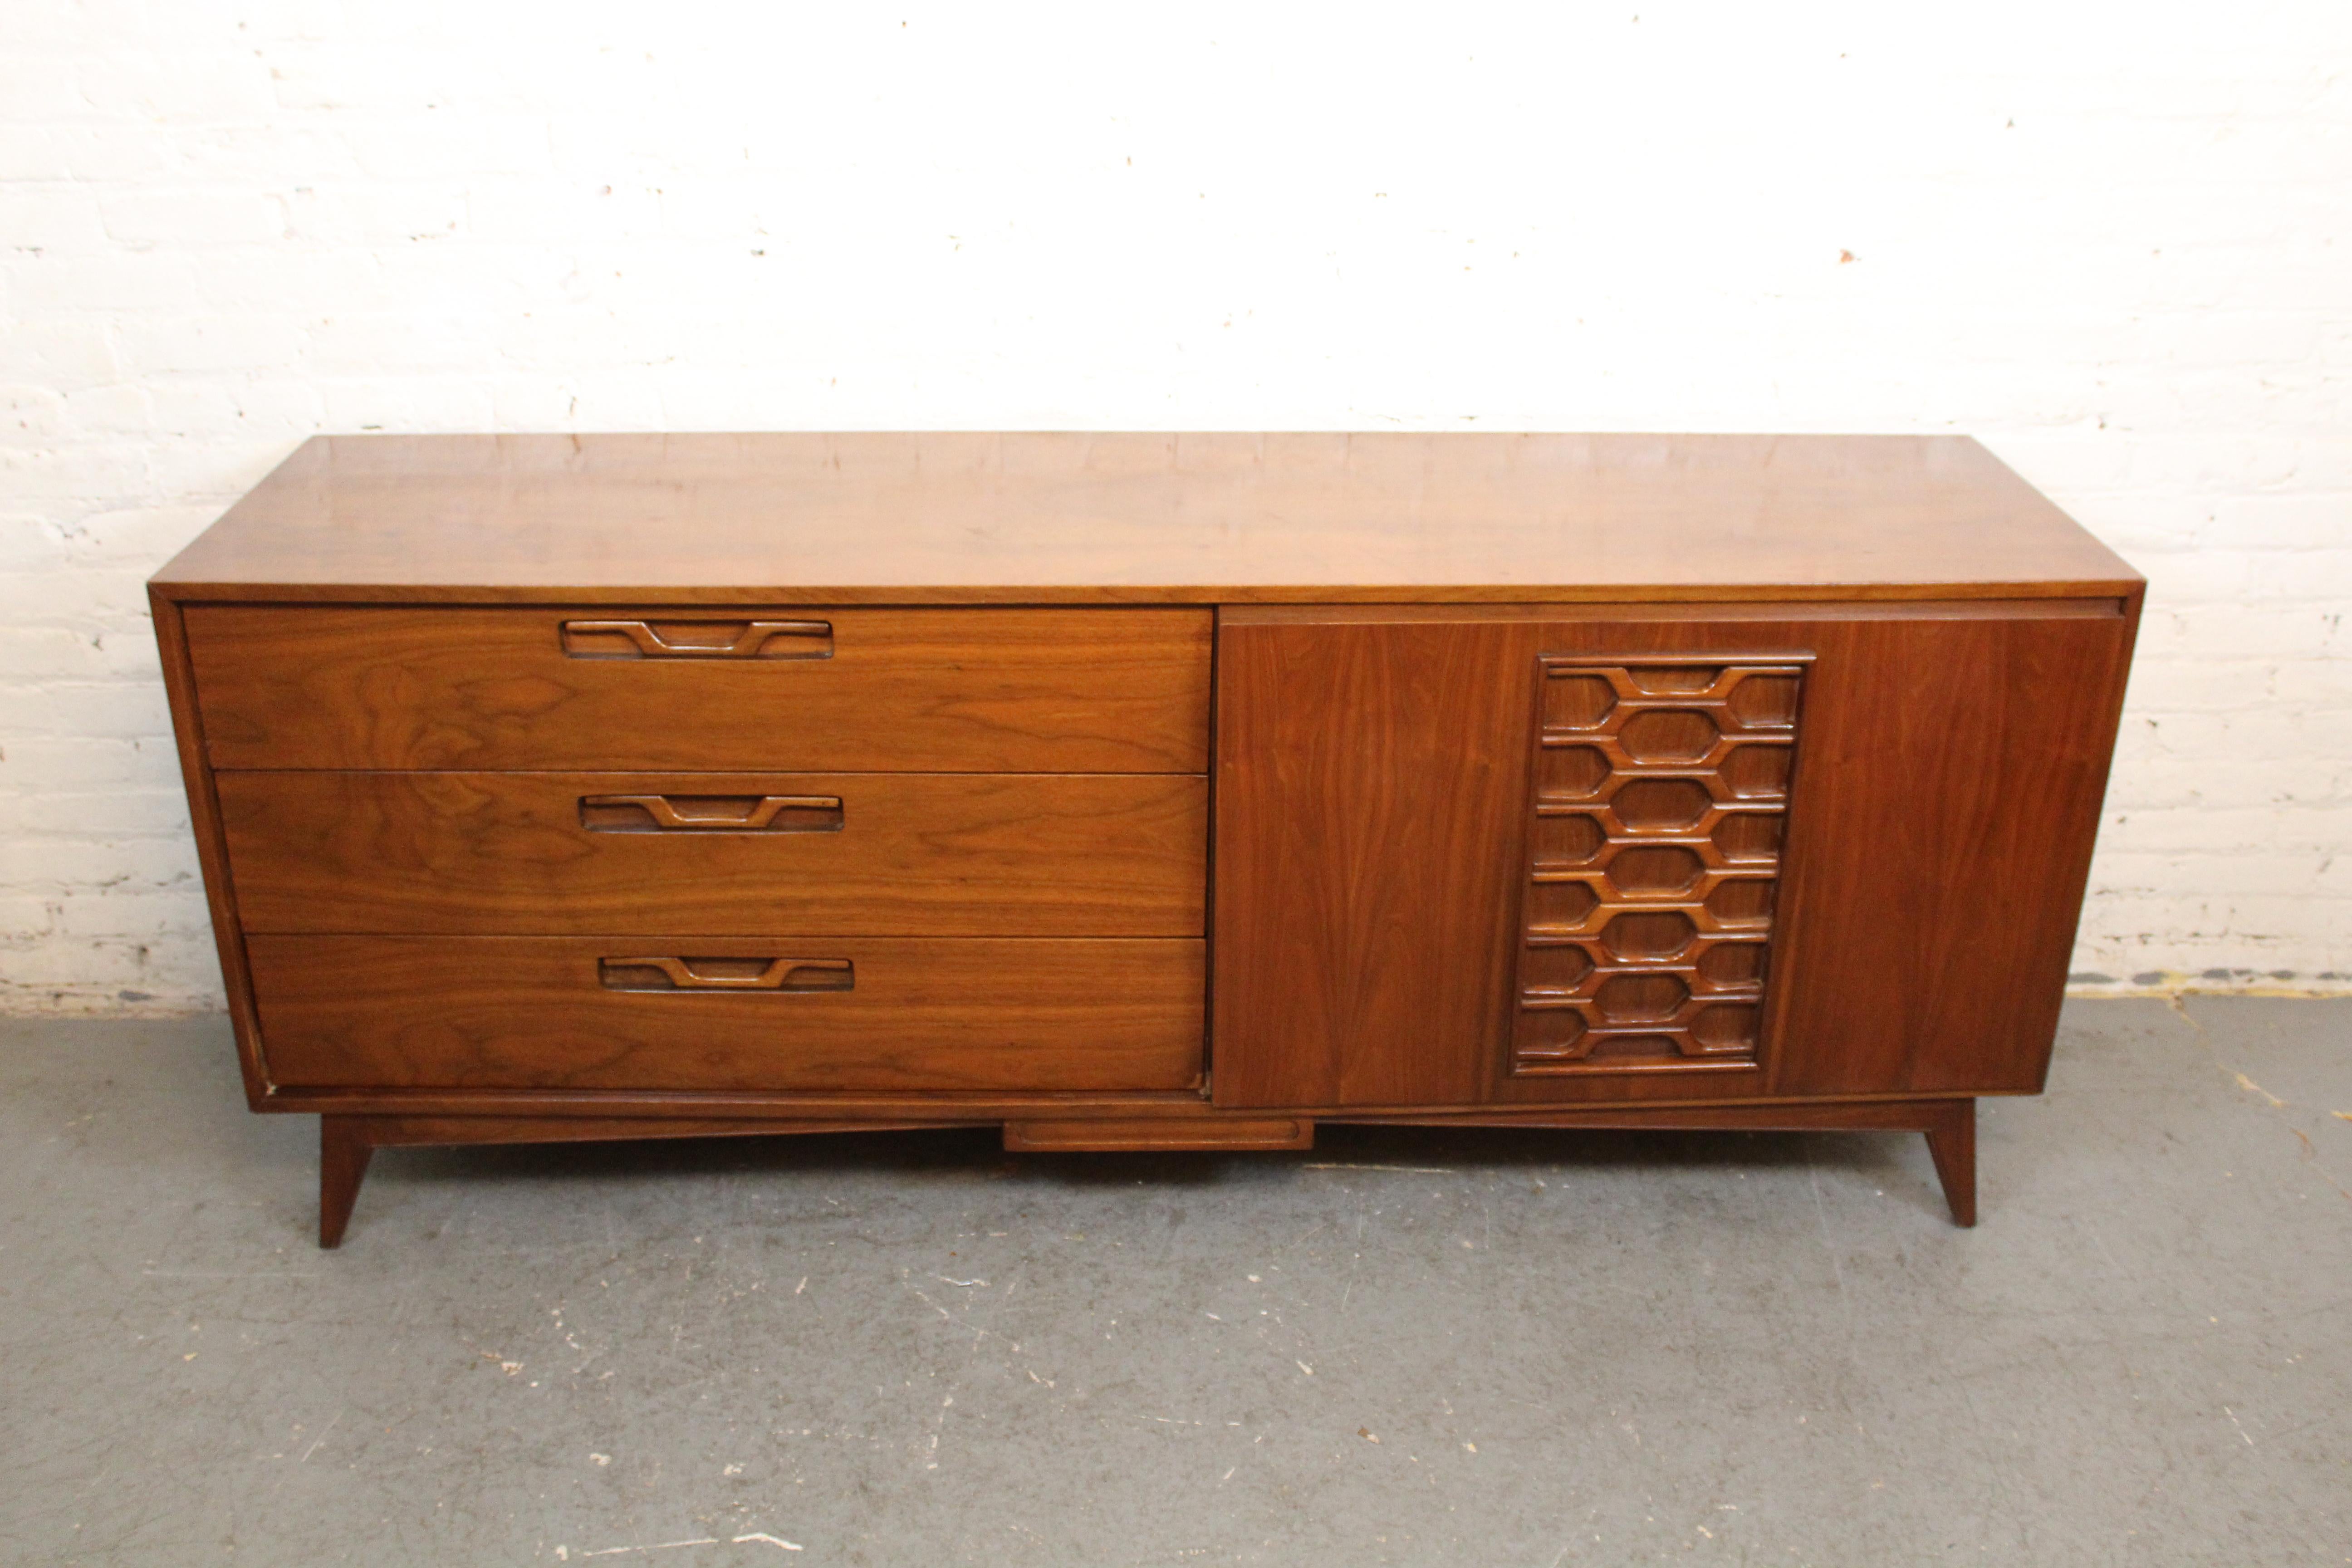 Carved Mid-Century American Walnut Sculptural Credenza For Sale